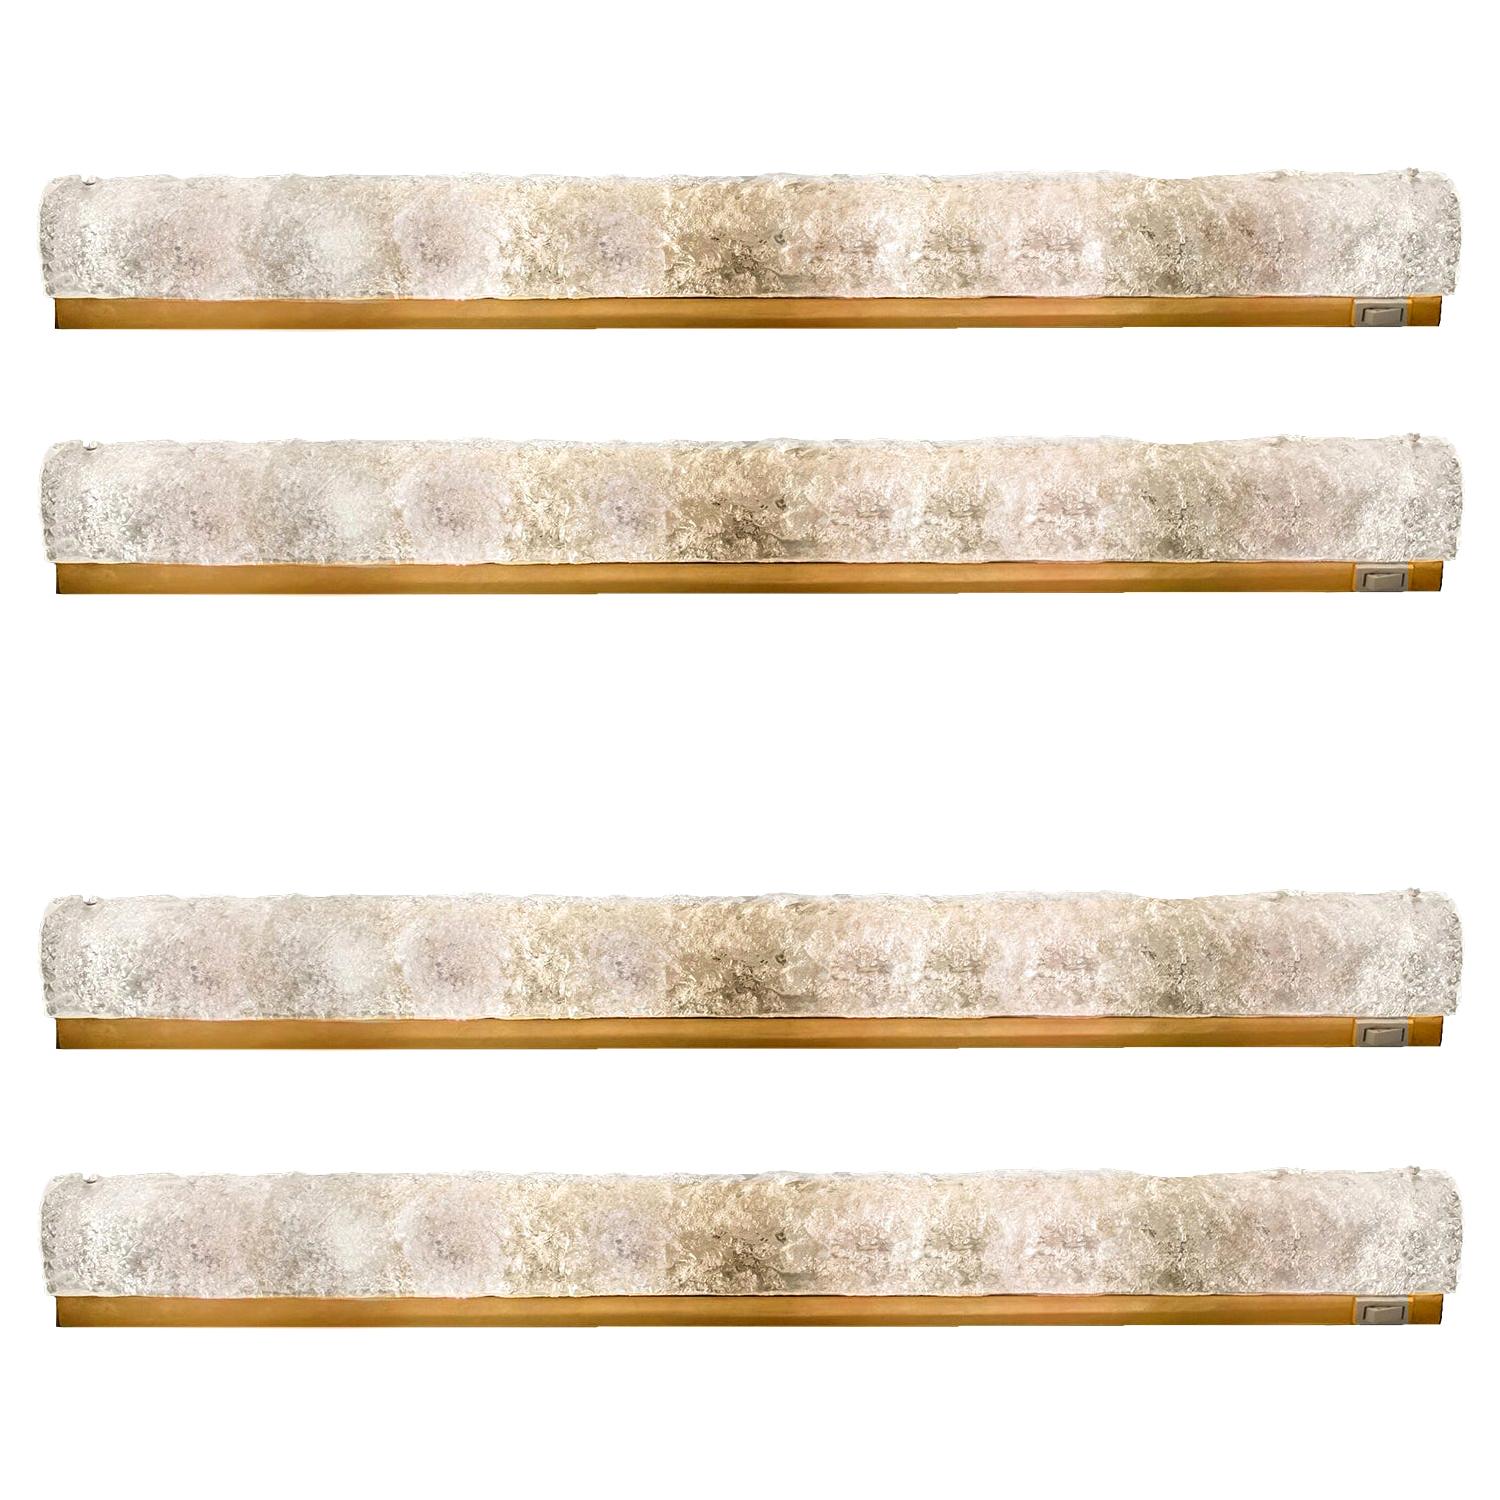 Set of 4 large high-end Murano glass on a brass base sconces by Hillebrand, Germany, circa 1960s.
It consists of textured quality clear crystal tubular shade simulating ice on a brass frame.

The design allows this light to be placed either